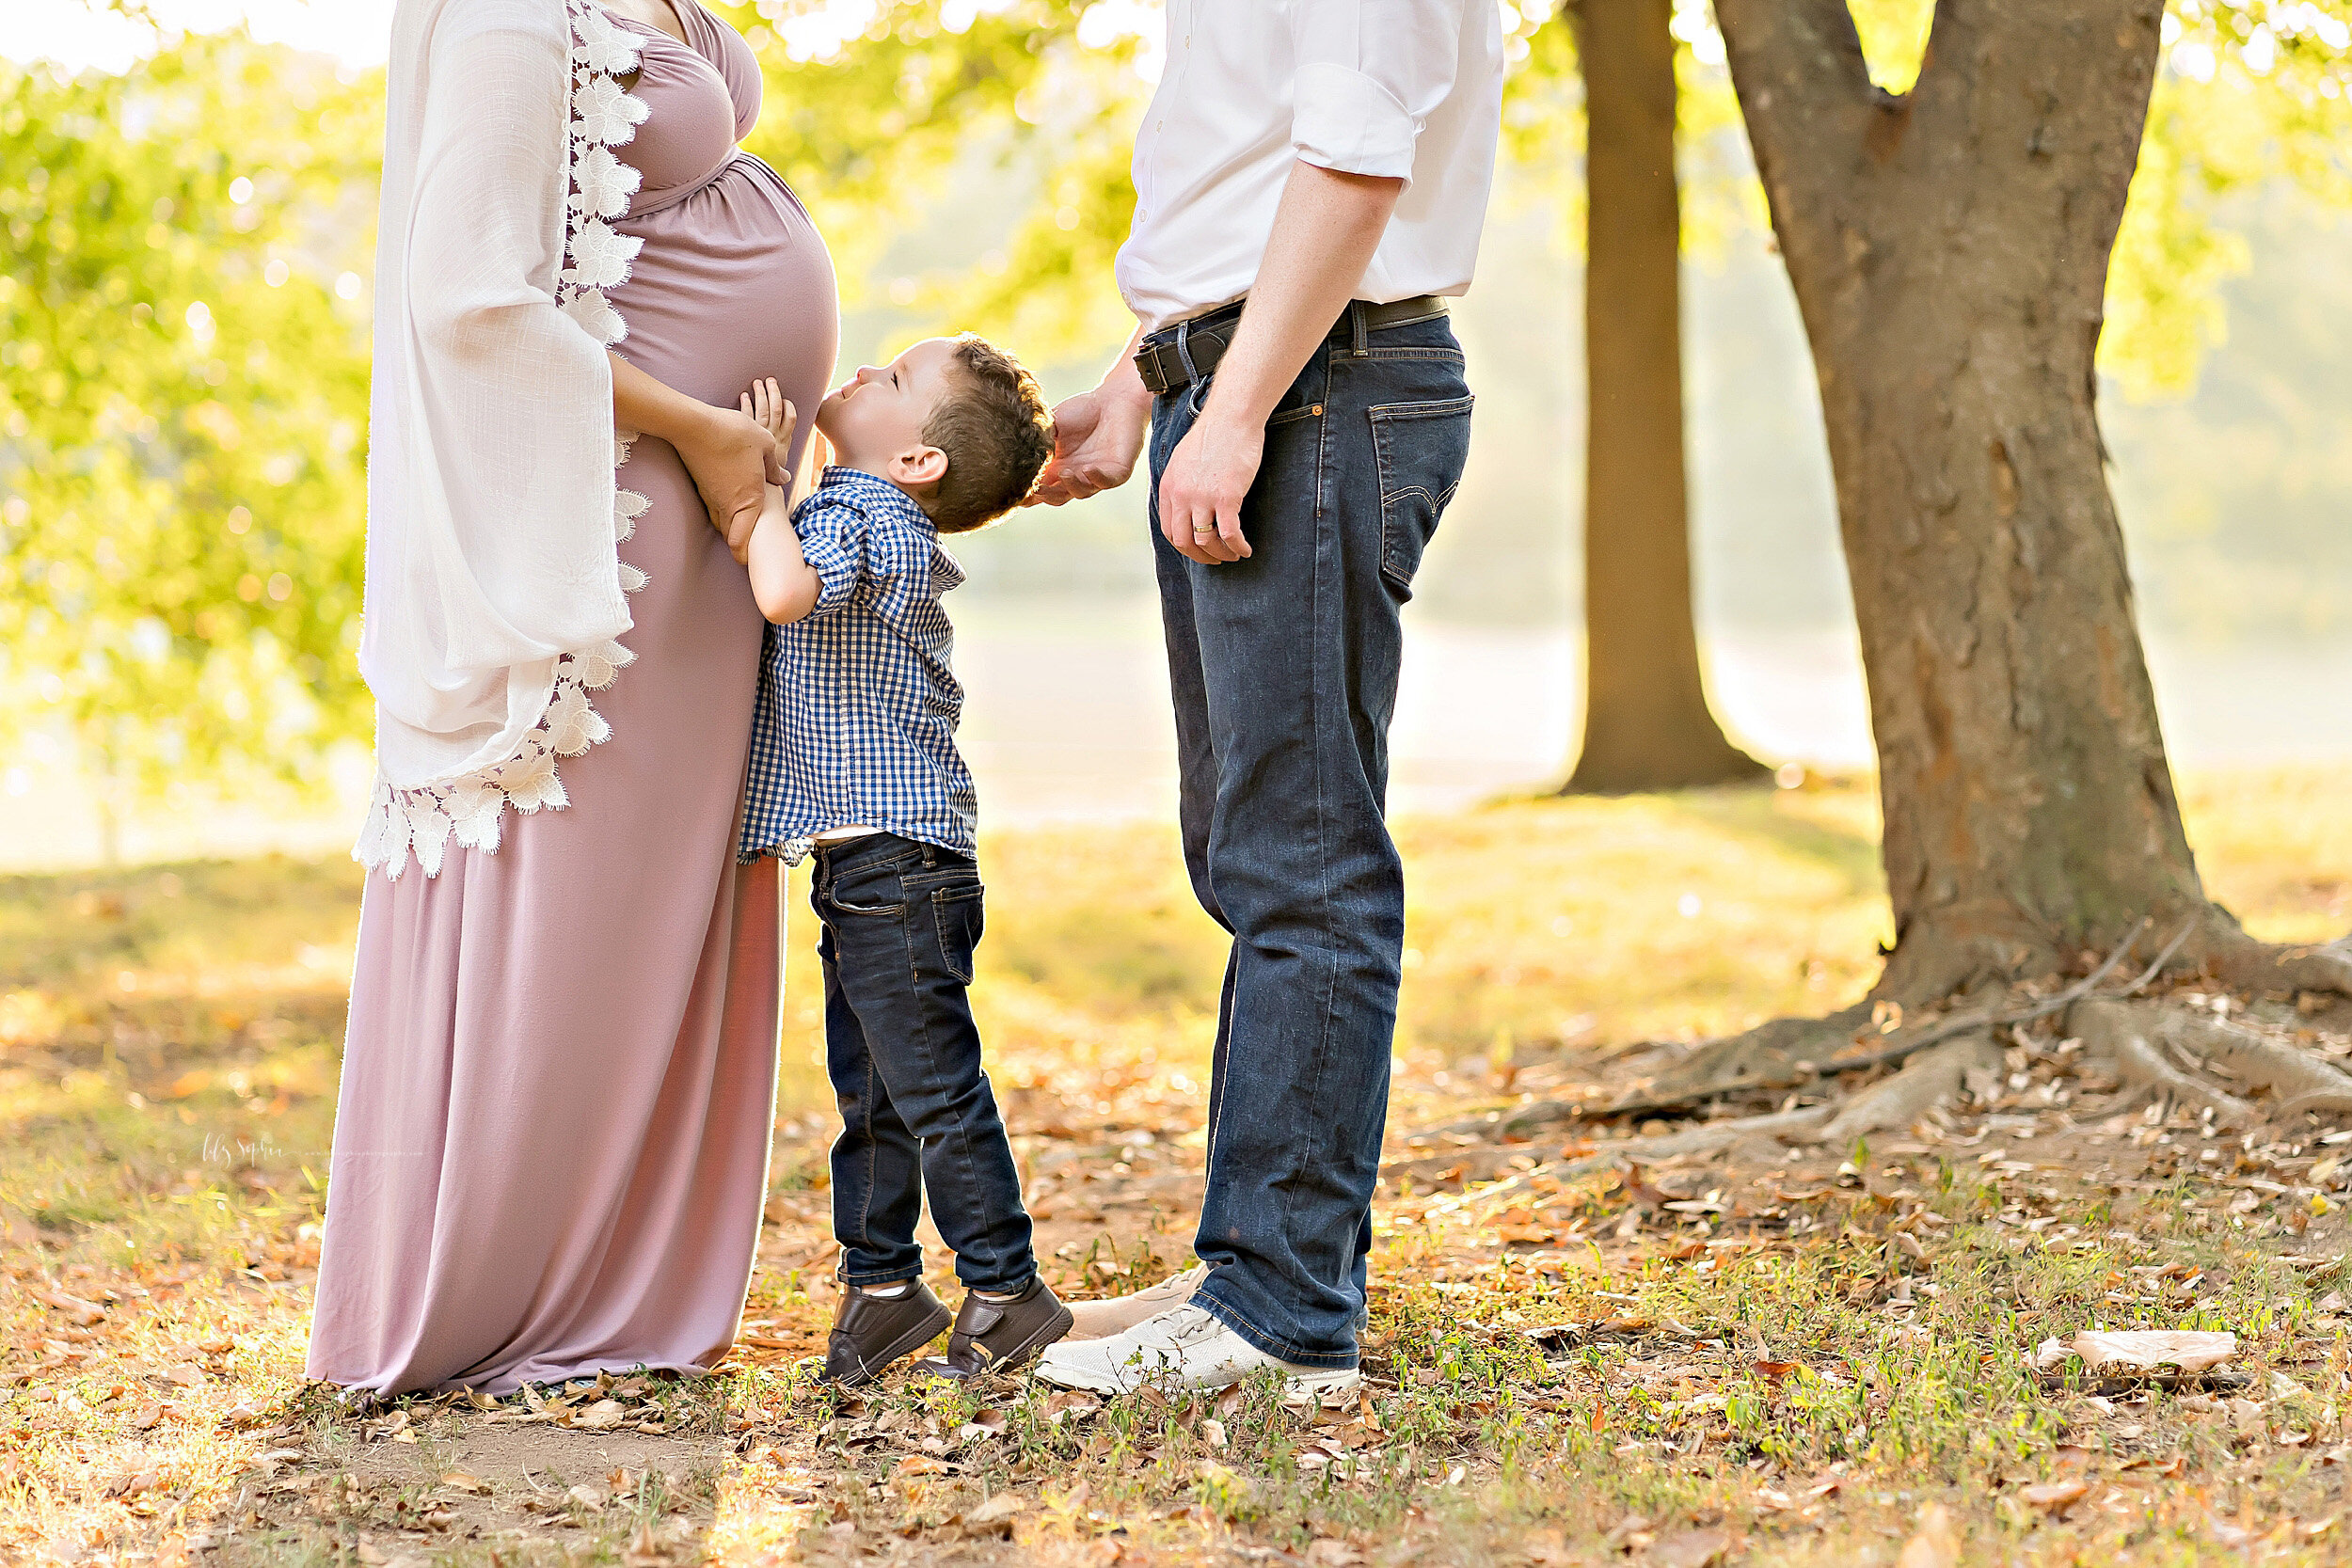 atlanta-decatur-old-fourth-ward-poncey-highlands-candler-park-grant-park-brookhaven-buckhead-virginia-highlands-west-end-decatur-lily-sophia-photography-family-maternity-park-session_2403.jpg